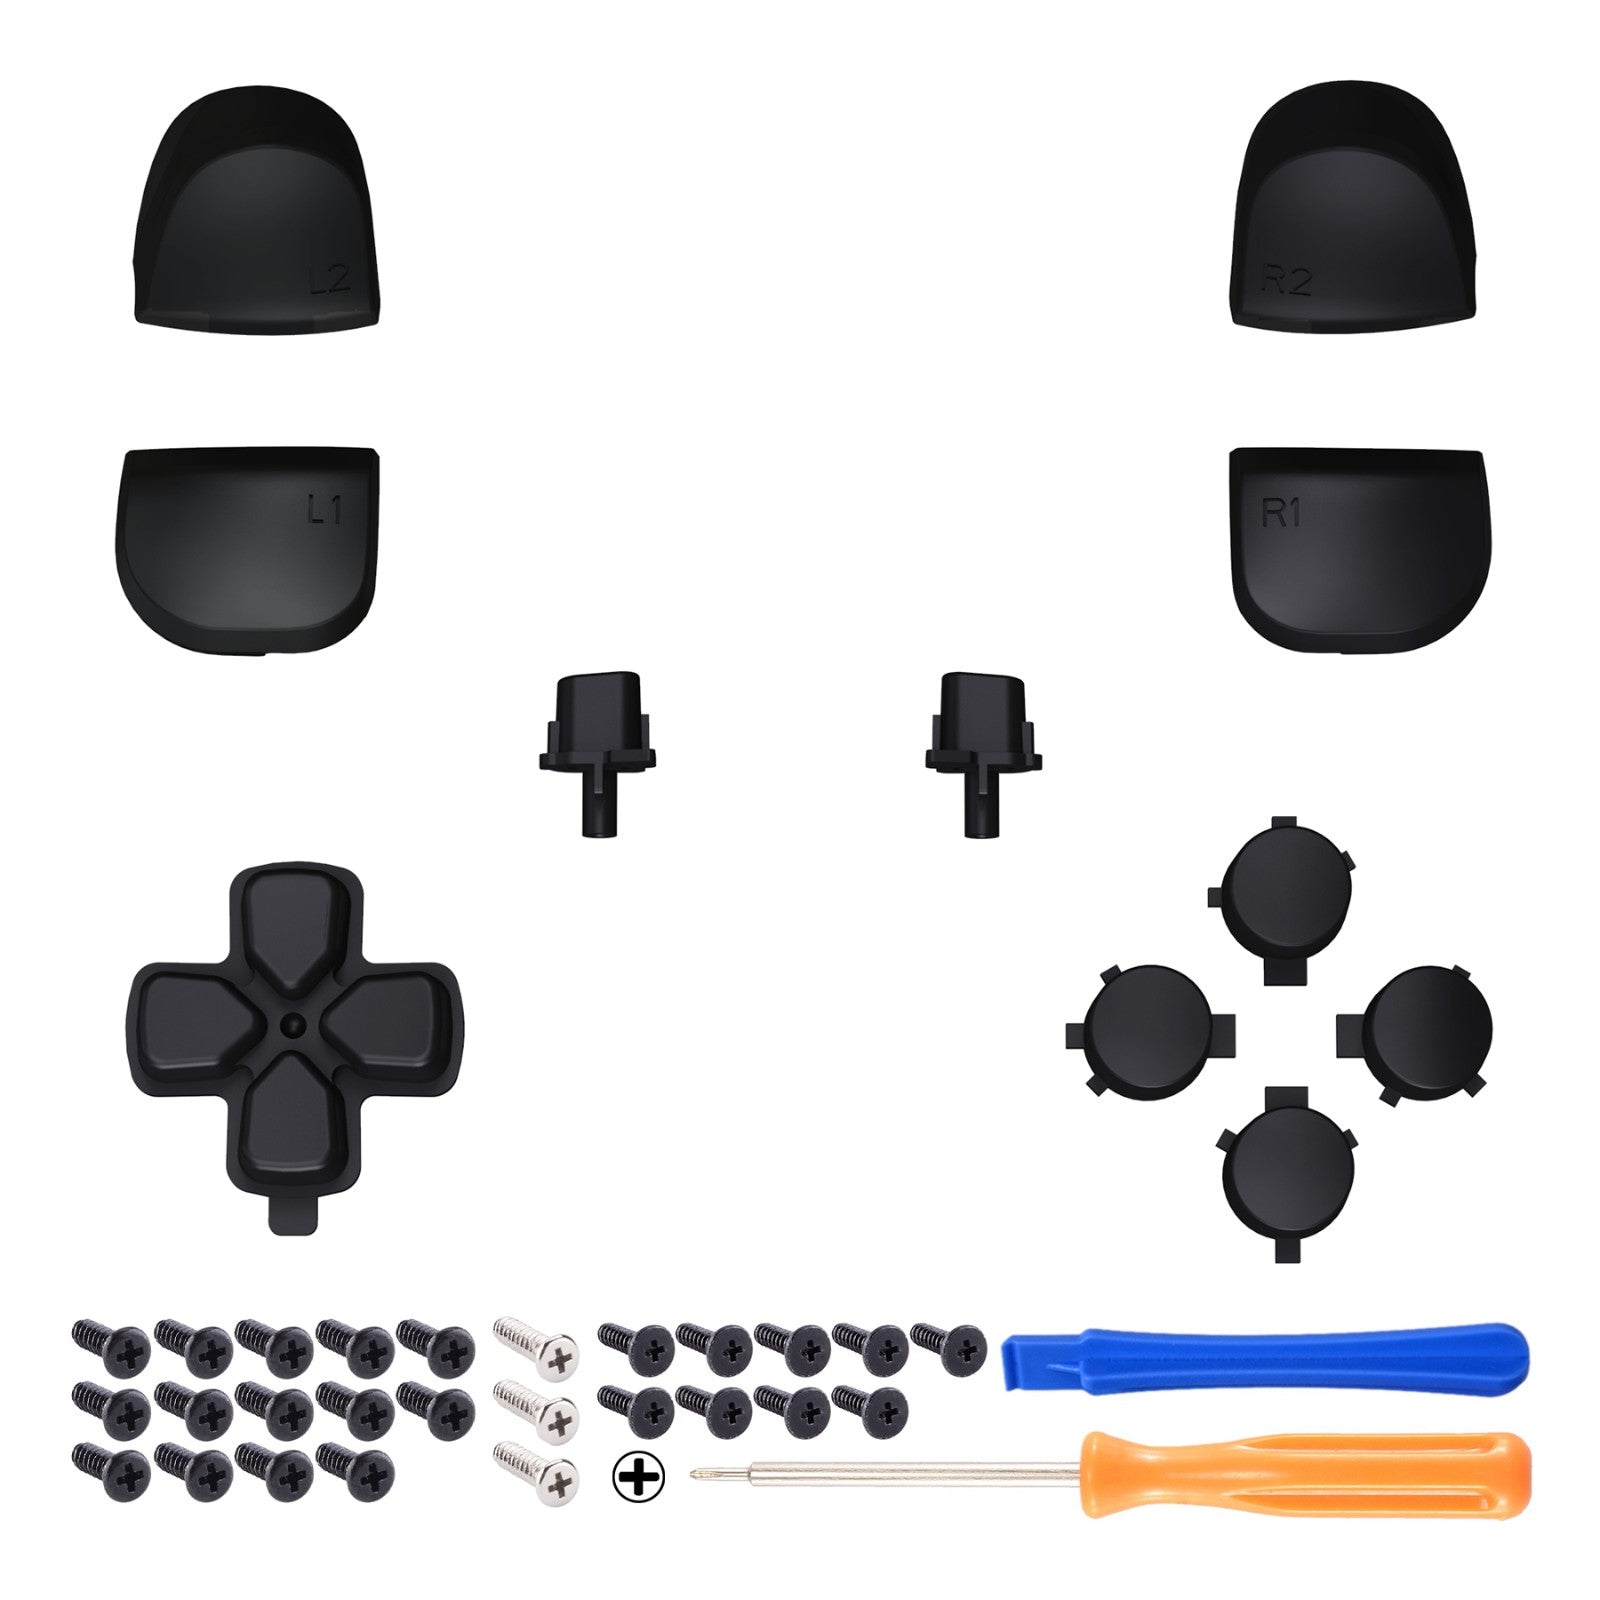 eXtremeRate Retail Replacement D-pad R1 L1 R2 L2 Triggers Share Options Face Buttons, Black Full Set Buttons Compatible with ps5 Controller BDM-010 & BDM-020 - JPF1009G2